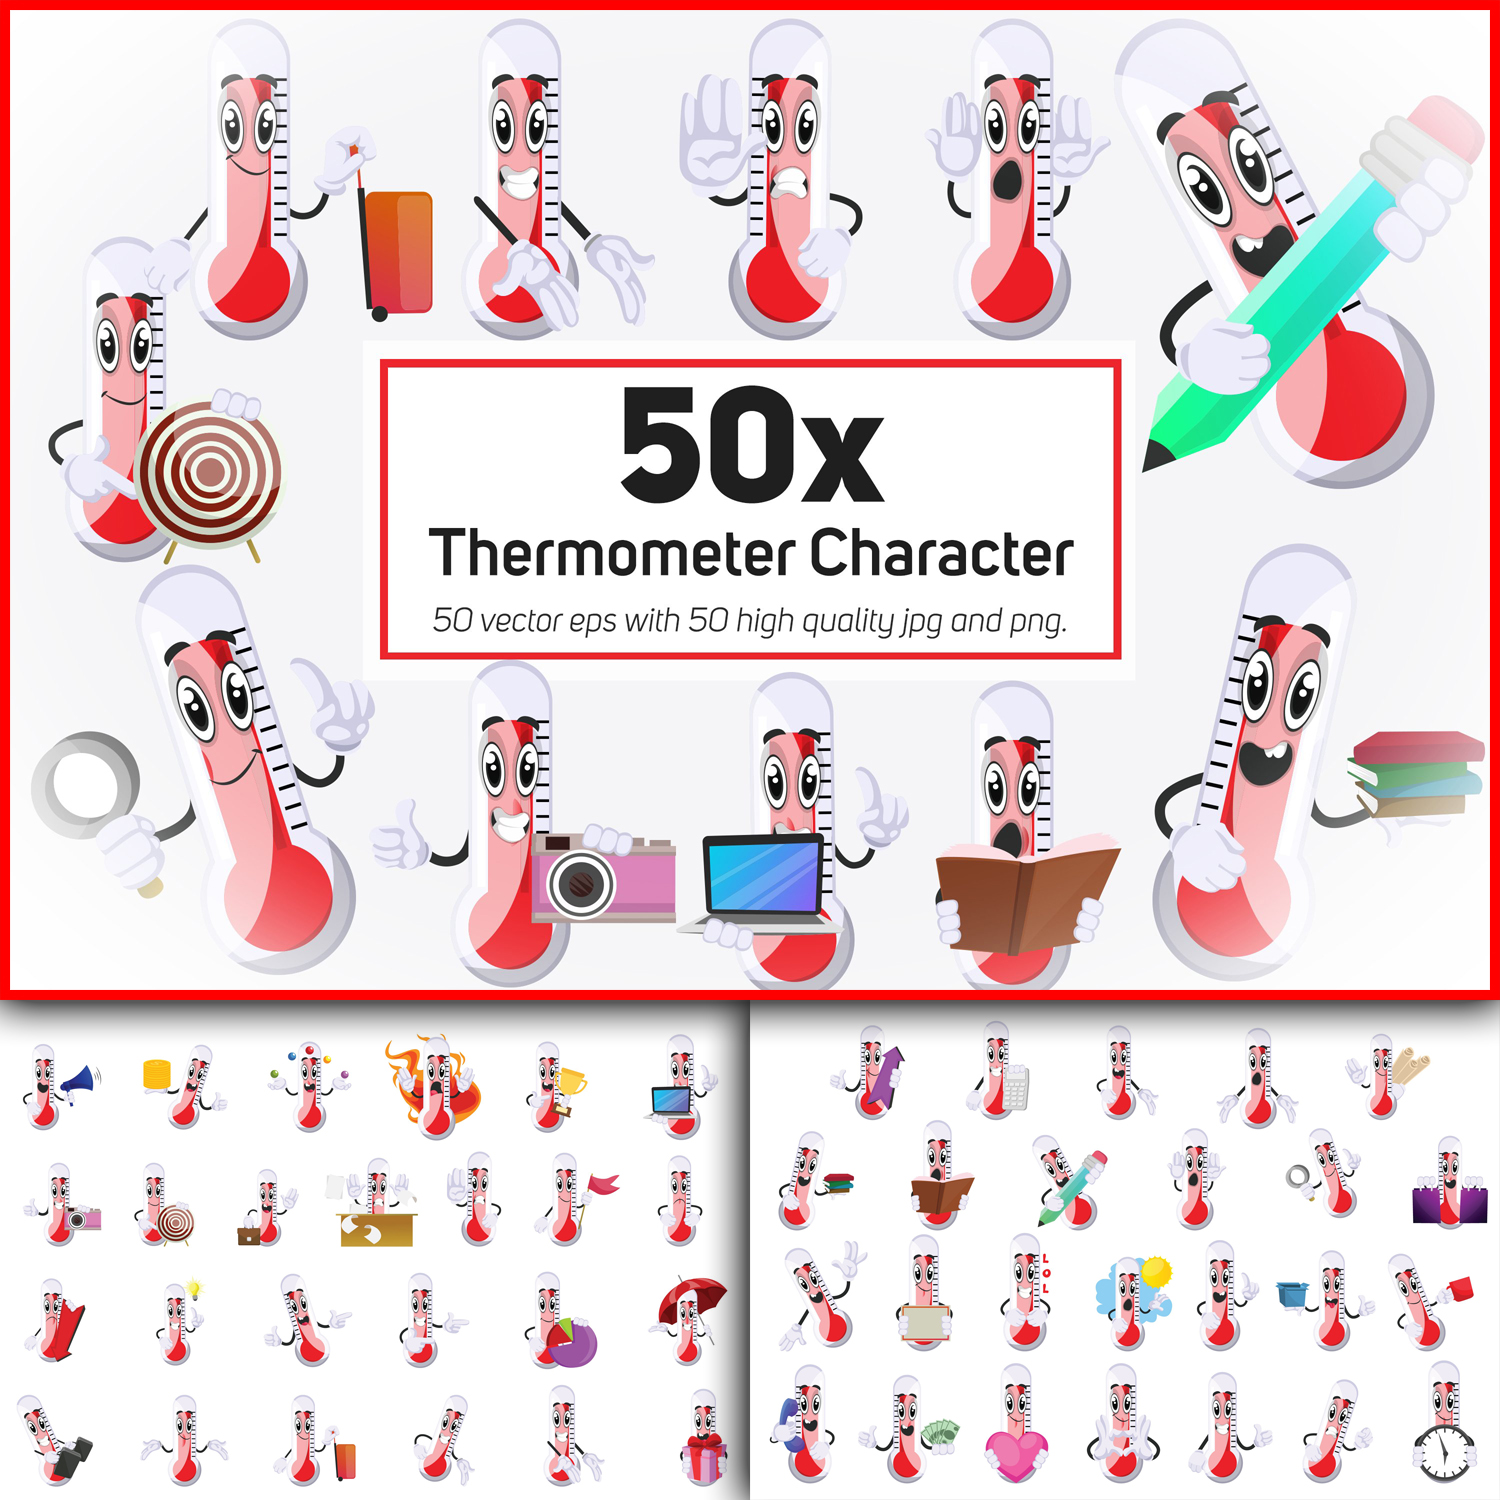 50x Thermometer Character or Mascot collection illustration.